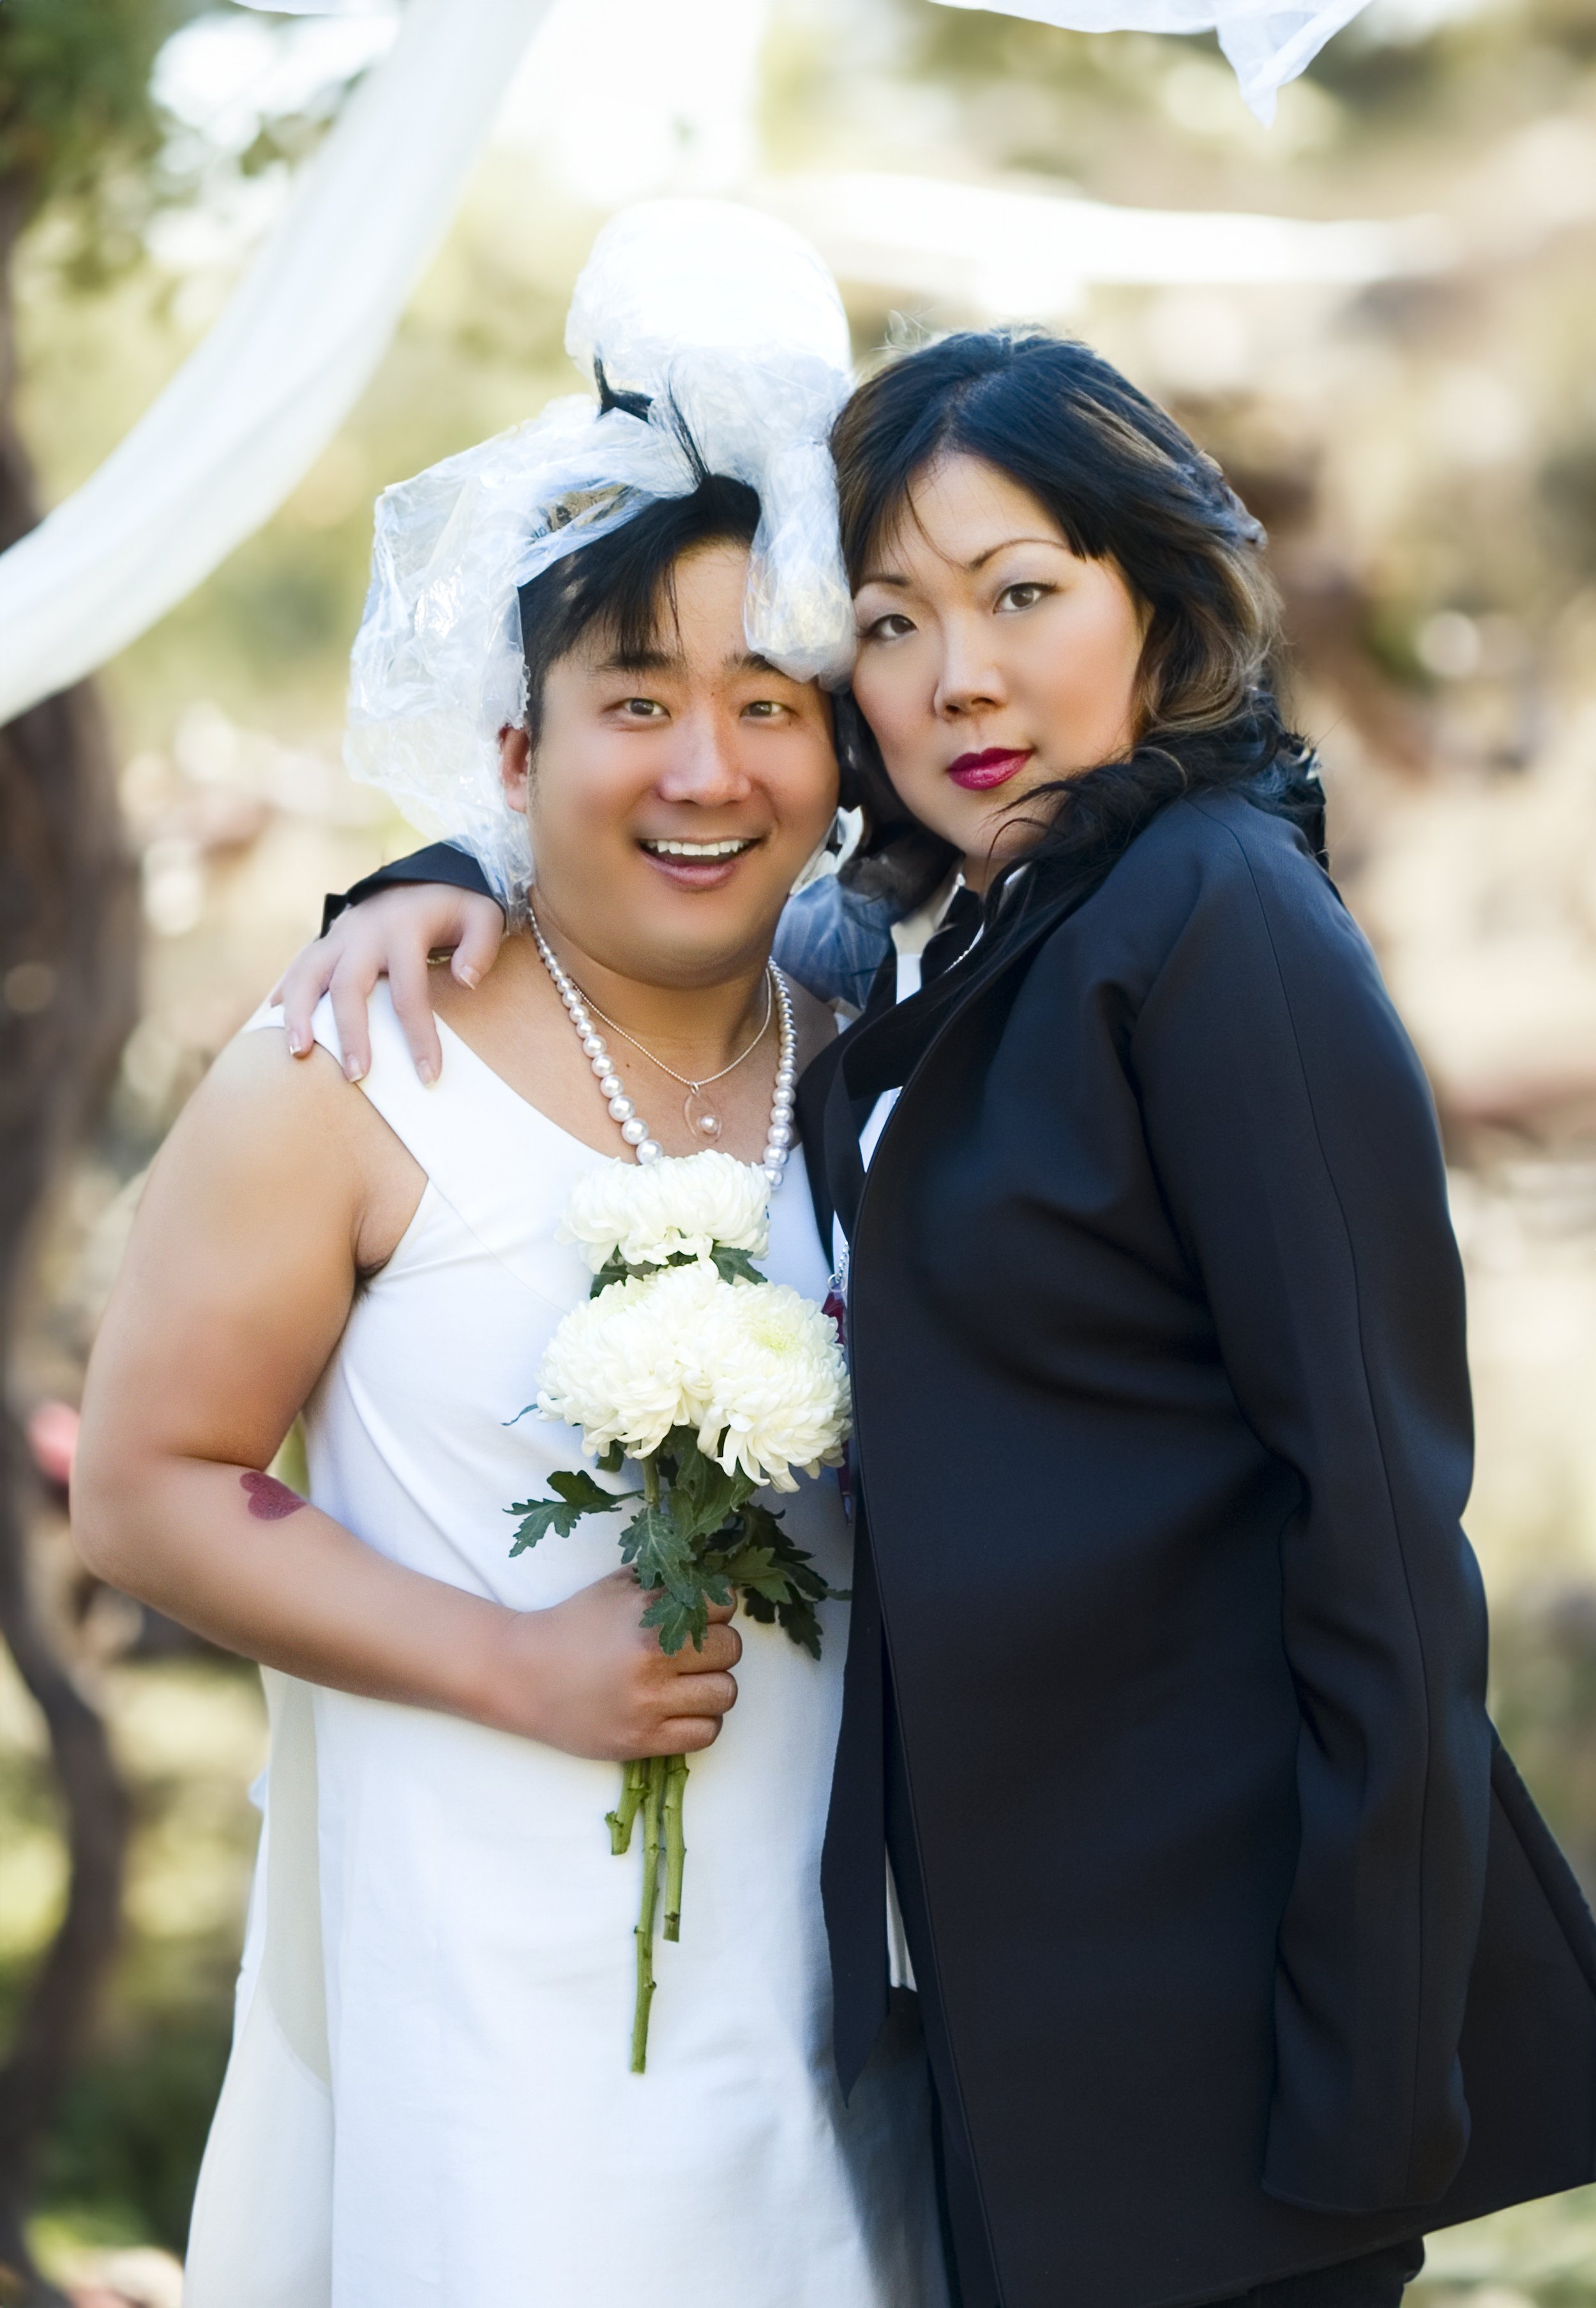 Margaret Cho and Bobby Lee